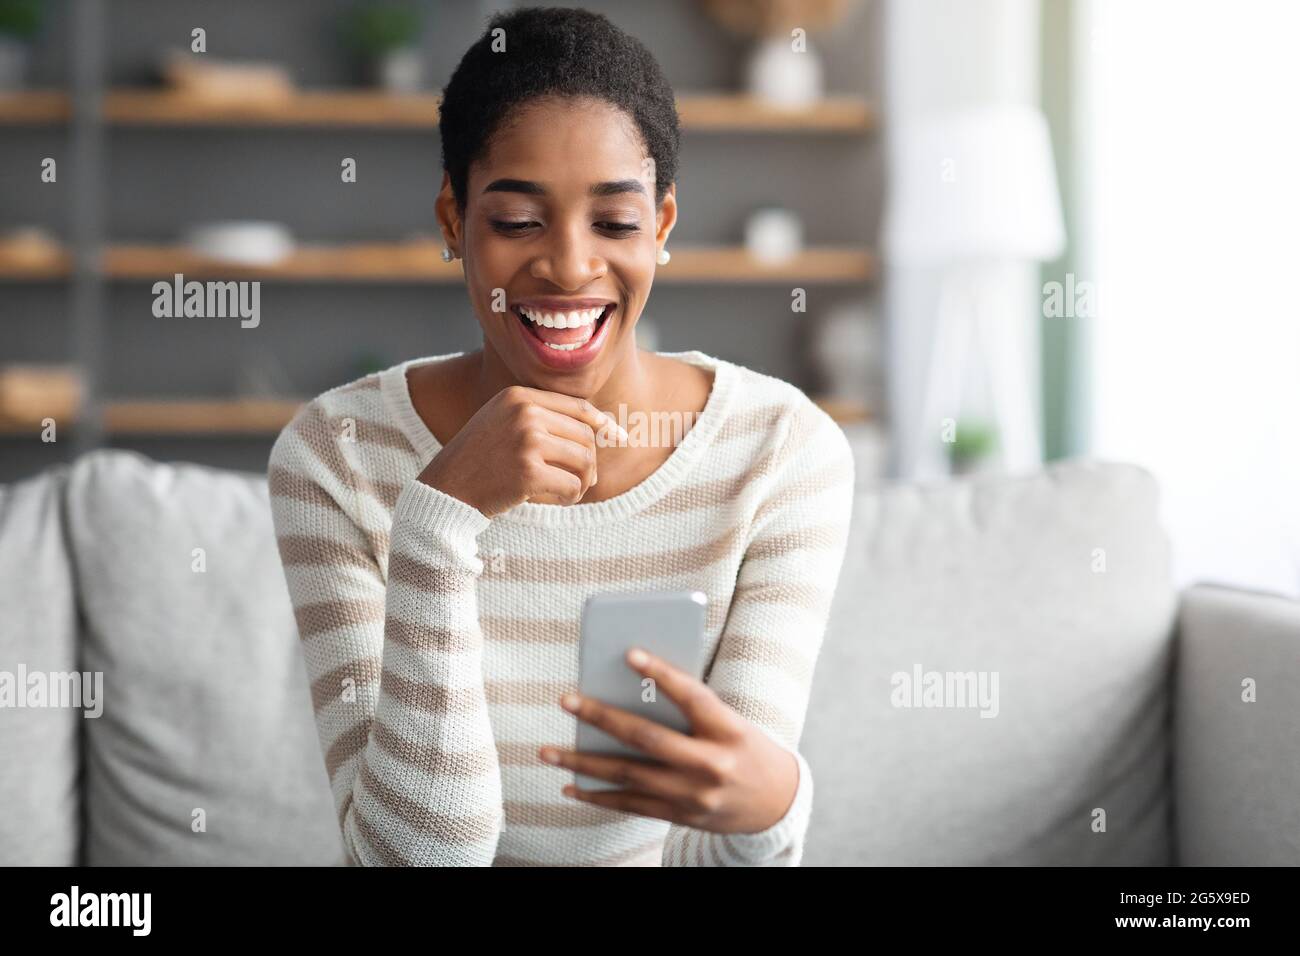 Online Dating App. Young Black Single Woman Using Smartphone At Home Stock Photo